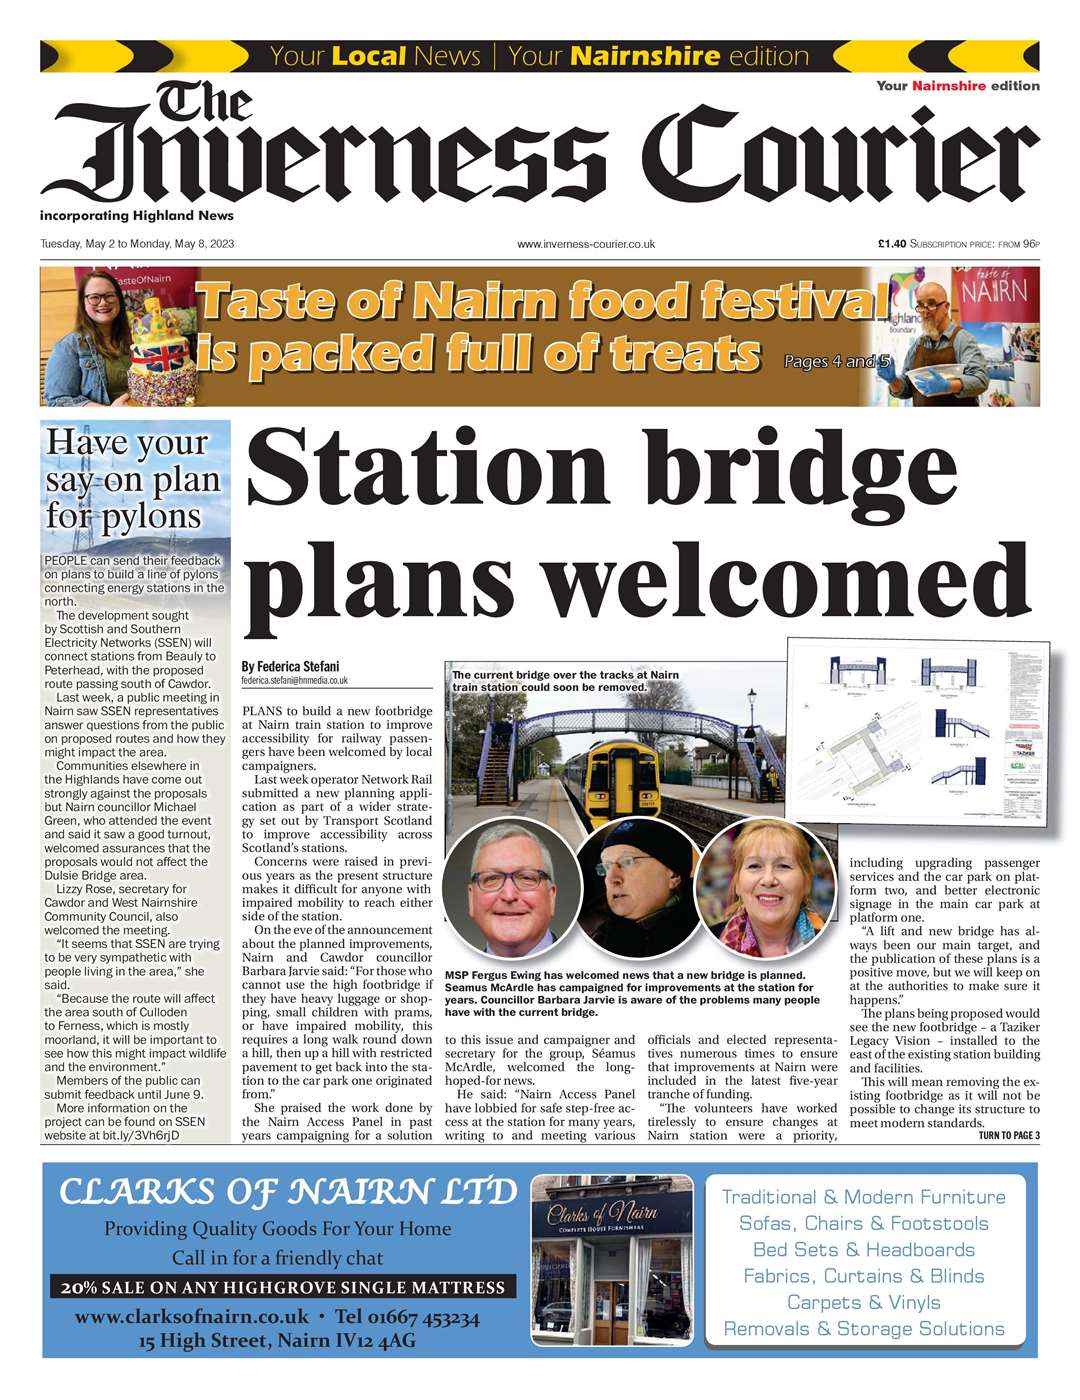 The Inverness Courier (Nairnshire edition), May 2, front page.